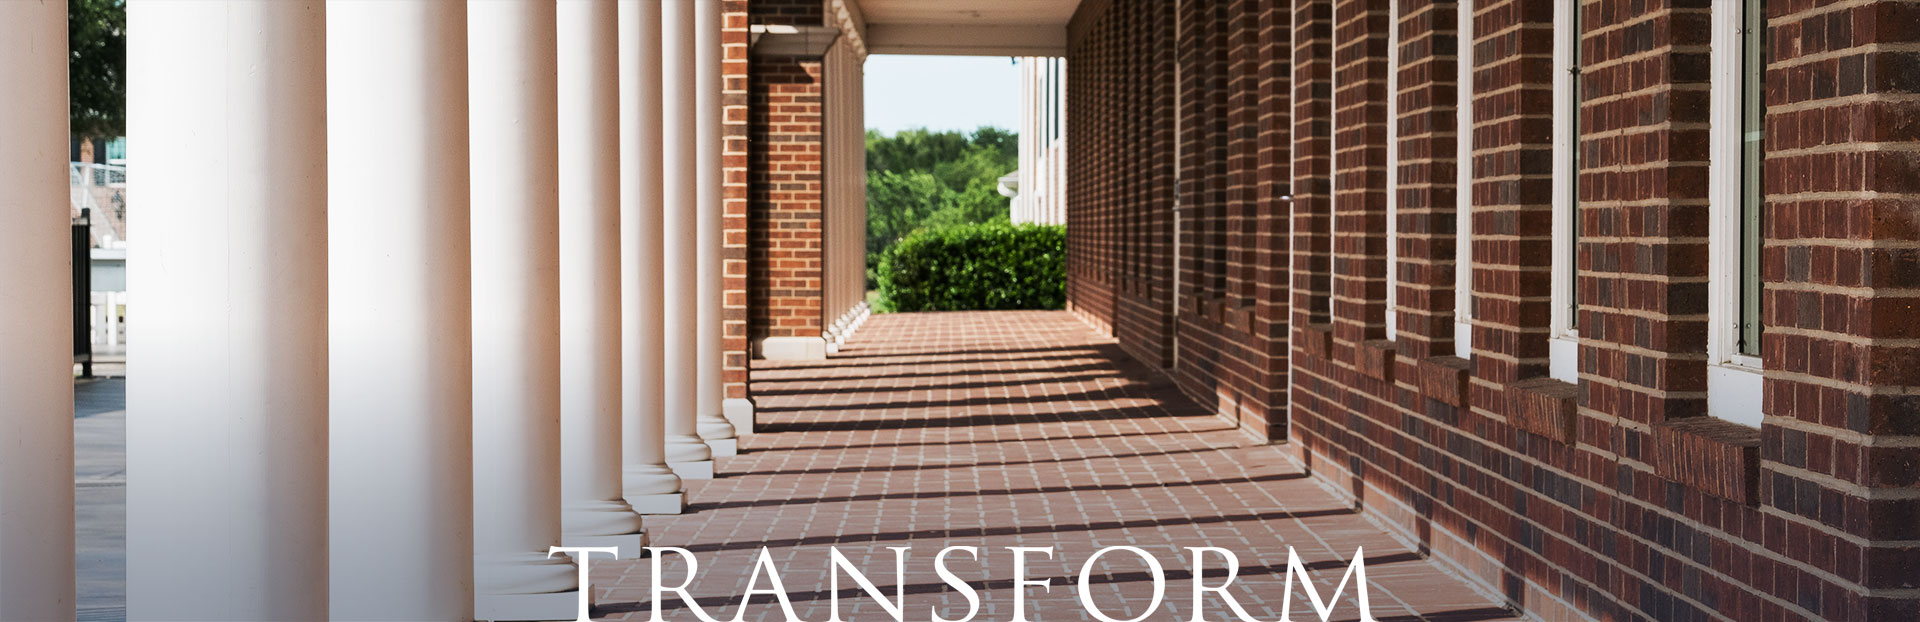 The Residential College - Transform Campaign | DBU